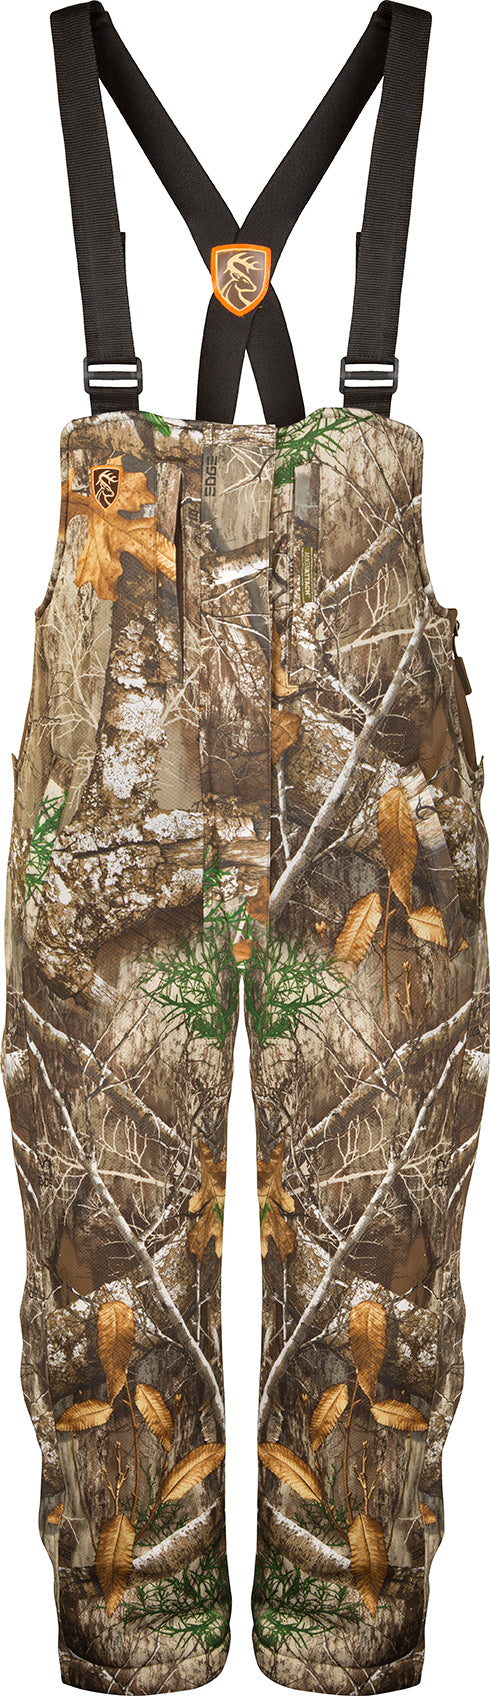 A pair of youth camouflage bibs from Drake Waterfowl's Youth Silencer Bib with Agion Active XL collection, featuring vertical pockets for hunting gear.